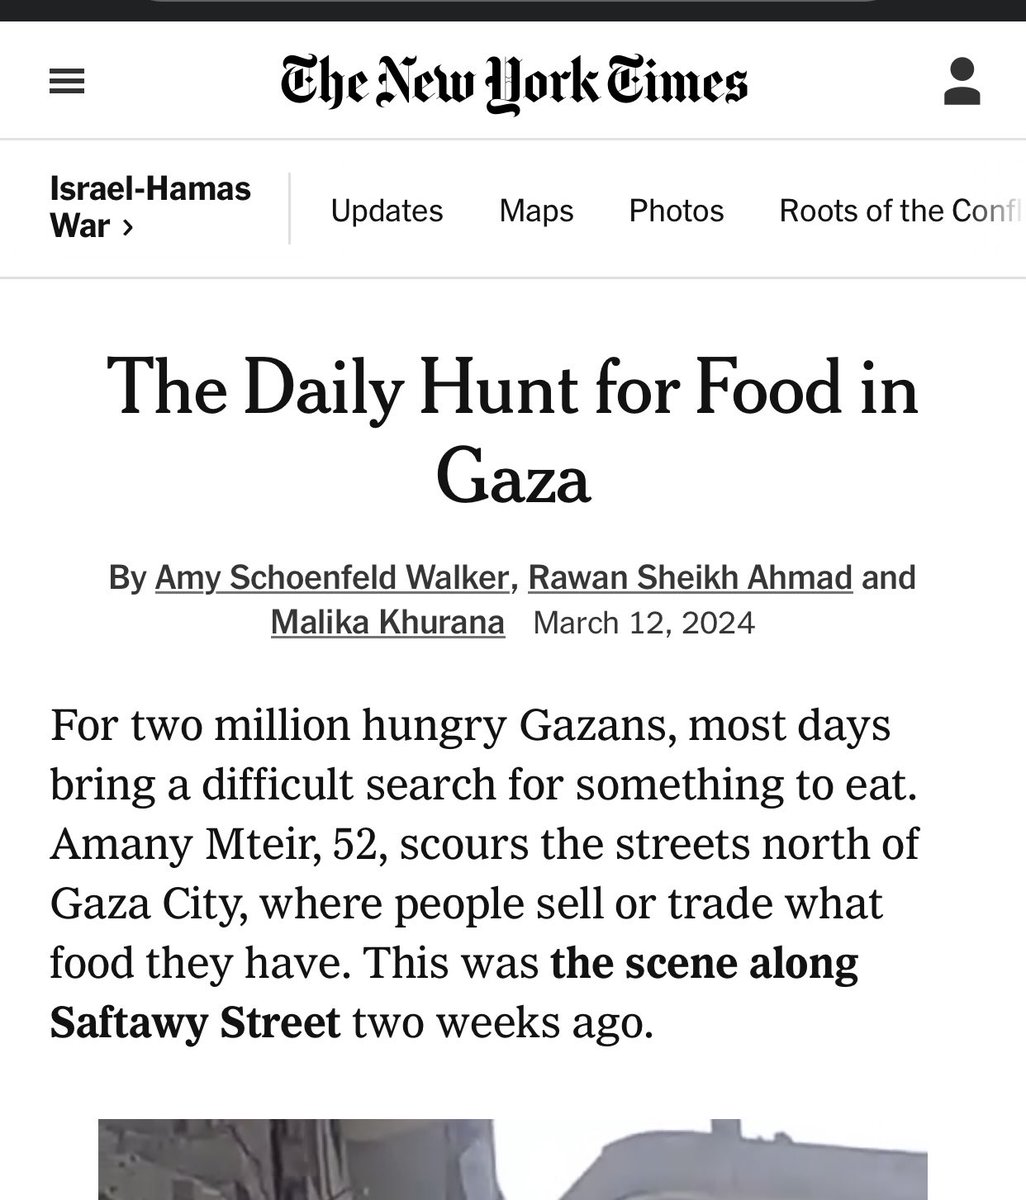 Human Rights Watch: Israel is using starvation as a weapon of war EU Chief: Israel is using starvation as a weapon in Gaza UN Experts: Israel is deliberately starving Palestinians in Gaza Western media: Gazans go hungry, hunt for food, sad times